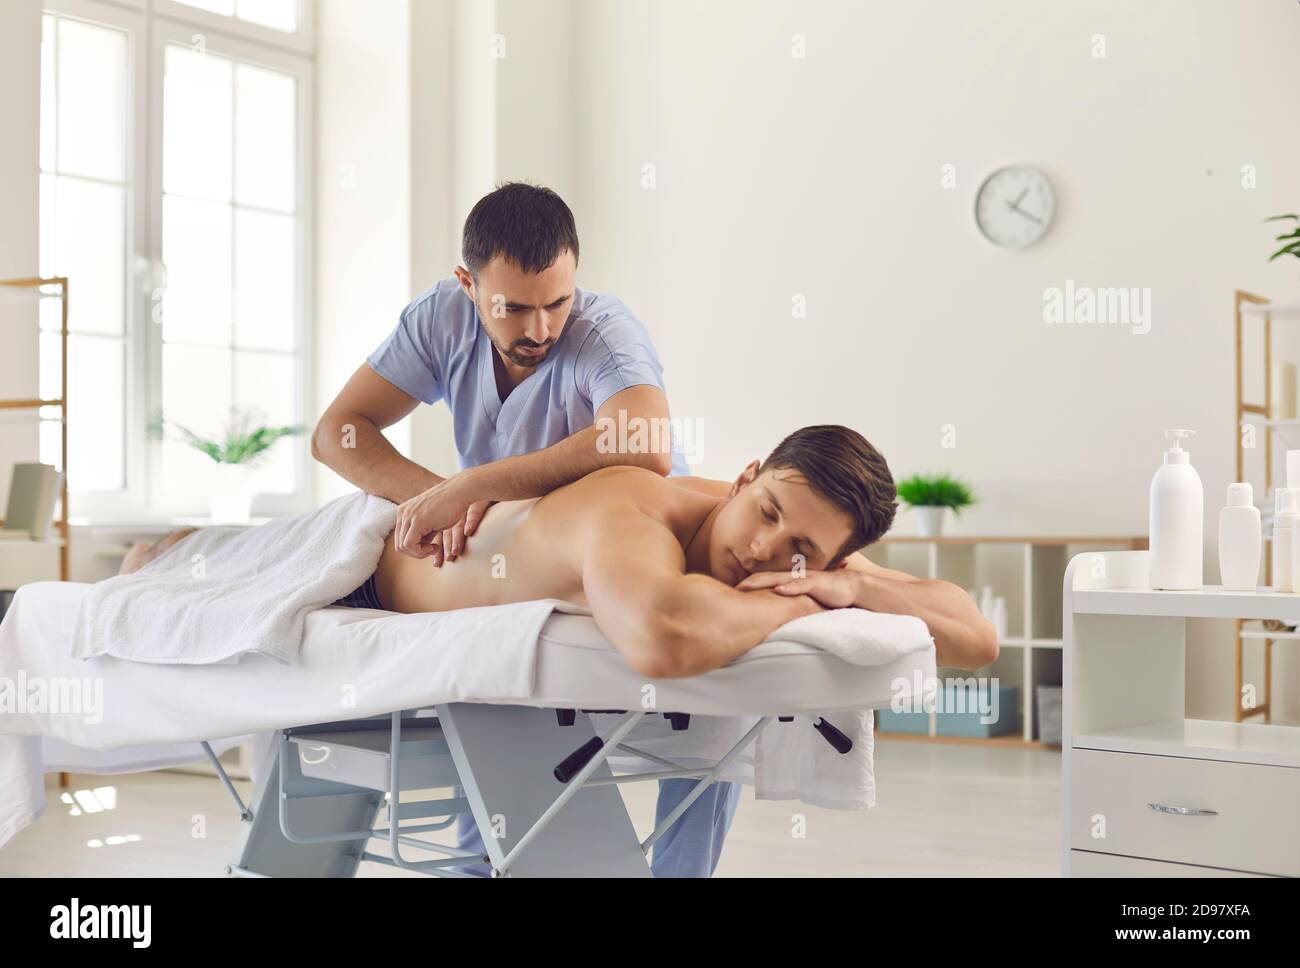 Man chiropractor making acupressure, manual therapy or rehabilitation massage Stock Photo